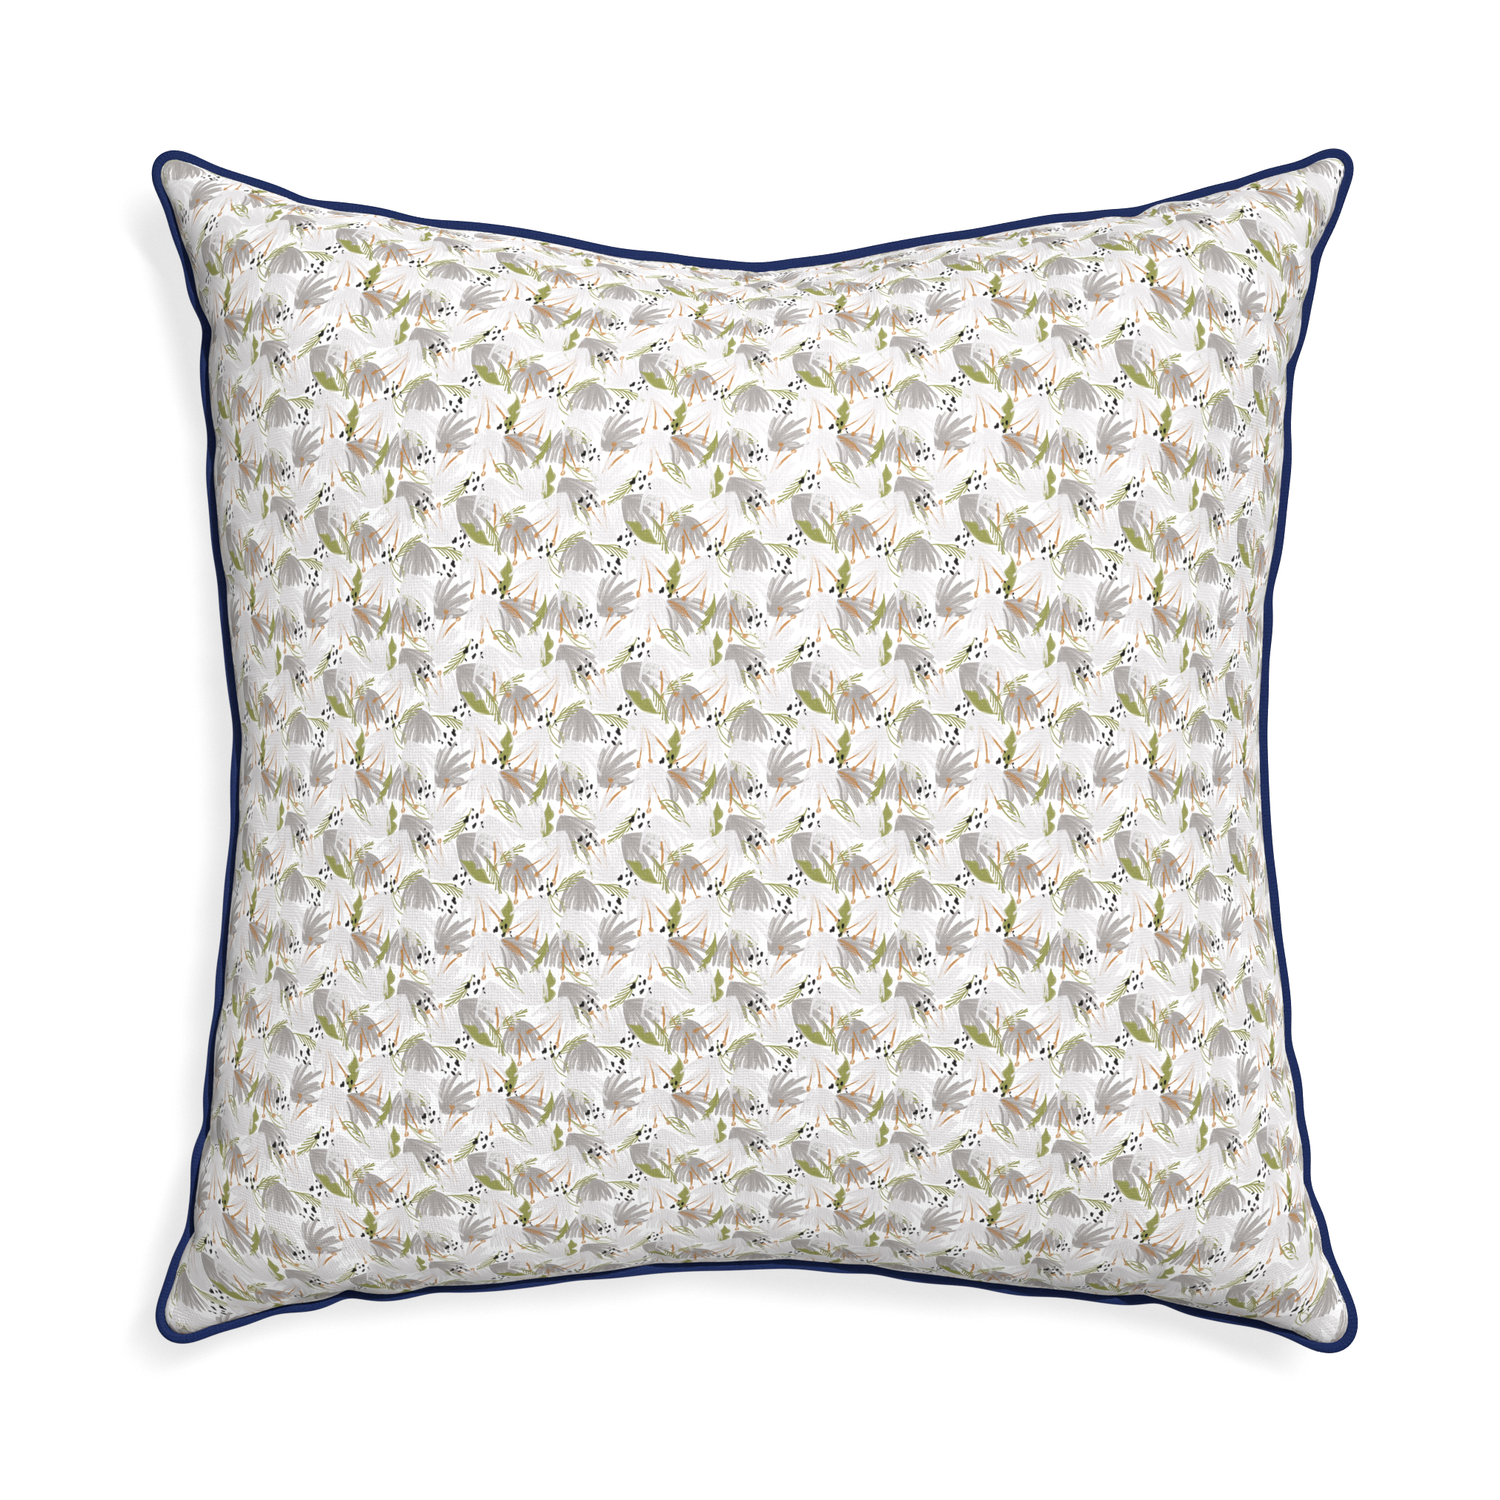 Euro-sham eden grey custom pillow with midnight piping on white background